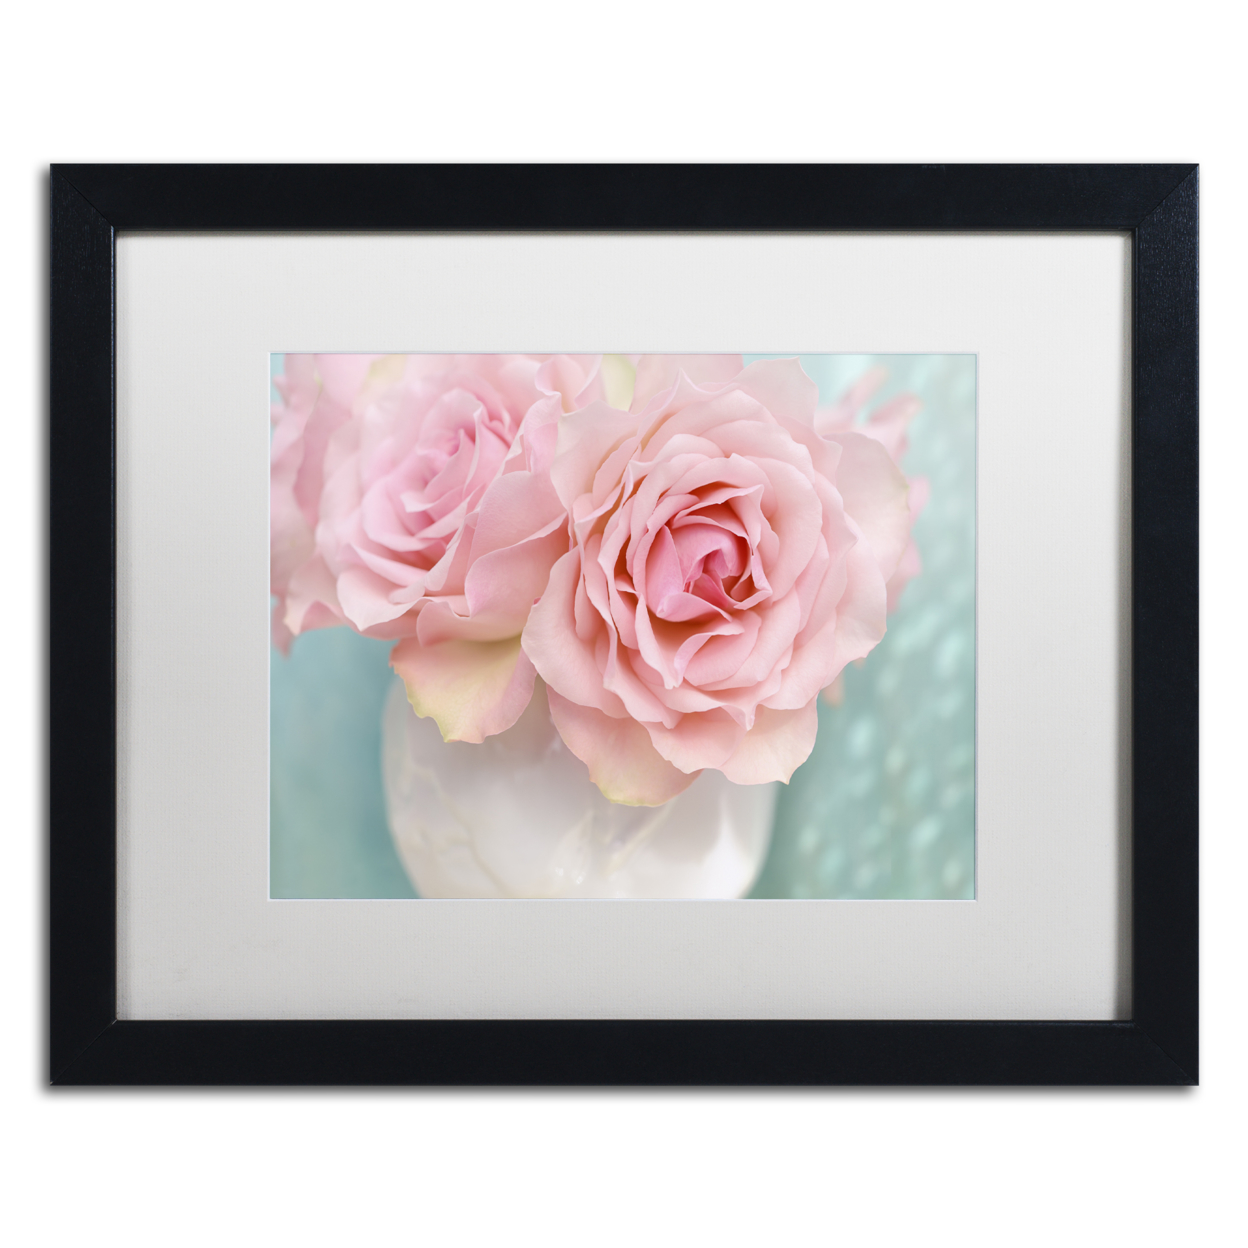 Cora Niele 'Pink Rose Bouquet' Black Wooden Framed Art 18 X 22 Inches